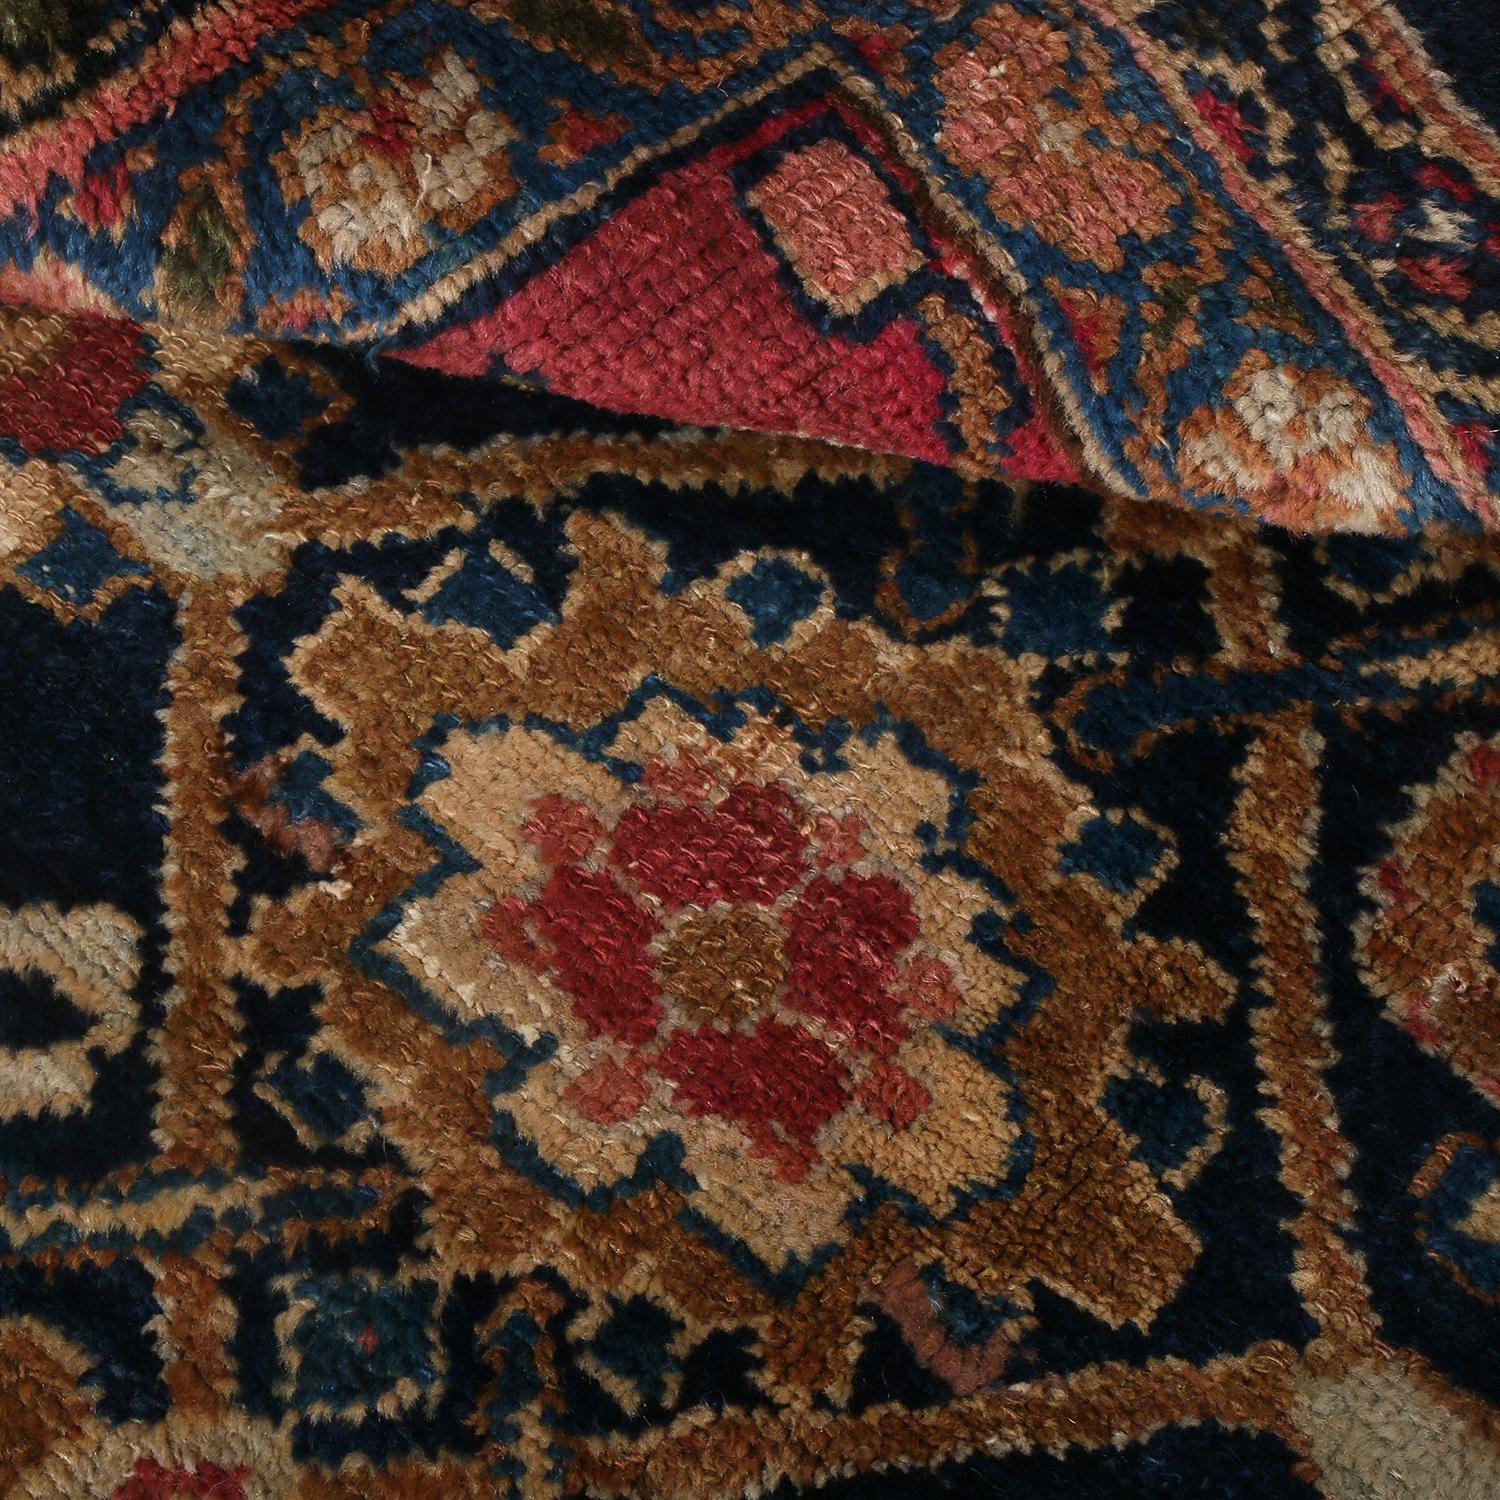 Late 19th Century Antique Hamadan Geometric-Floral Red and Navy Blue Wool Persian Rug